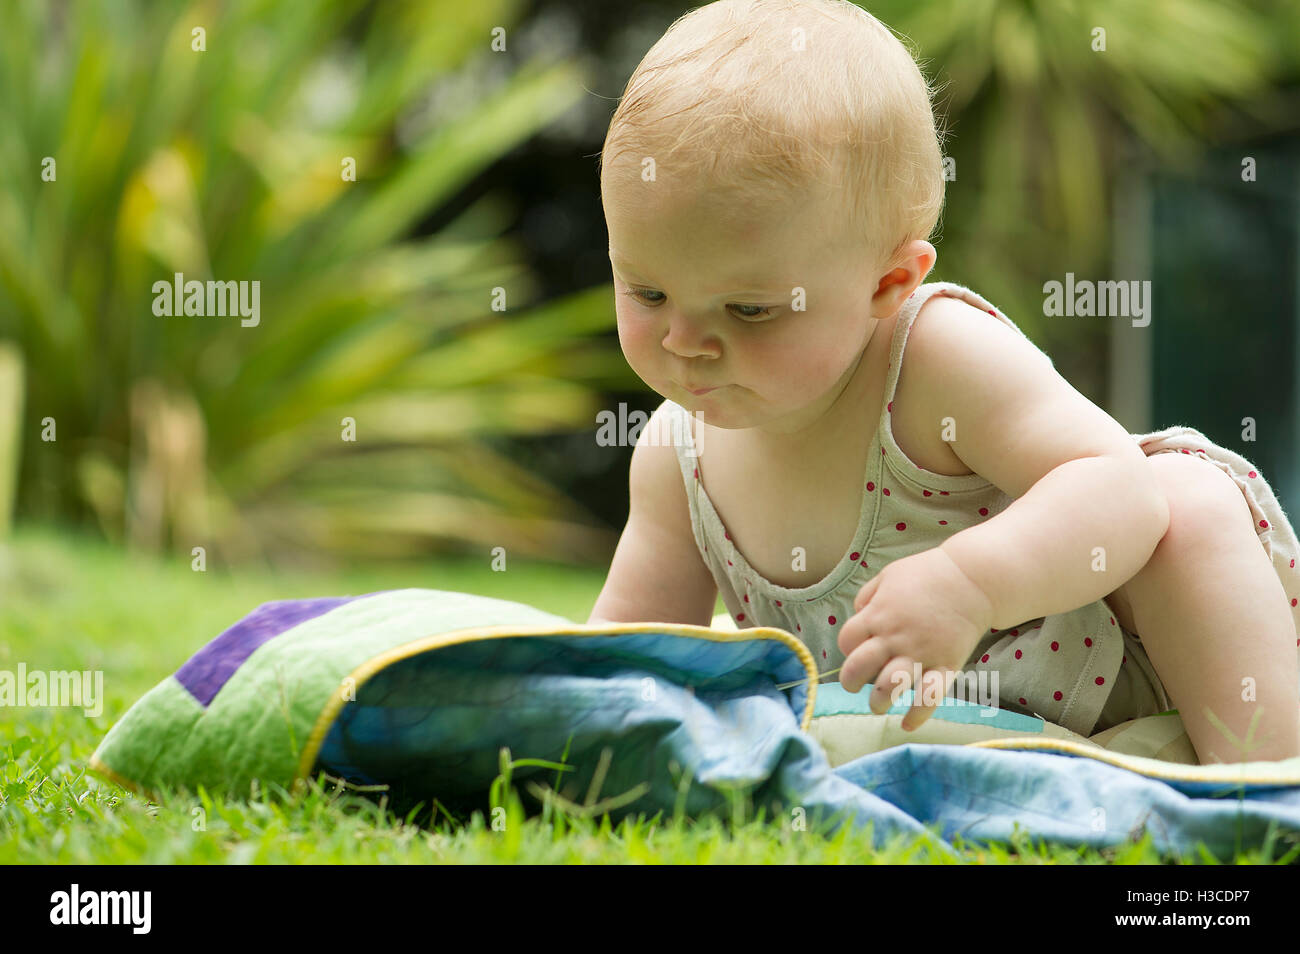 Baby sitting on blanket outdoors Stock Photo